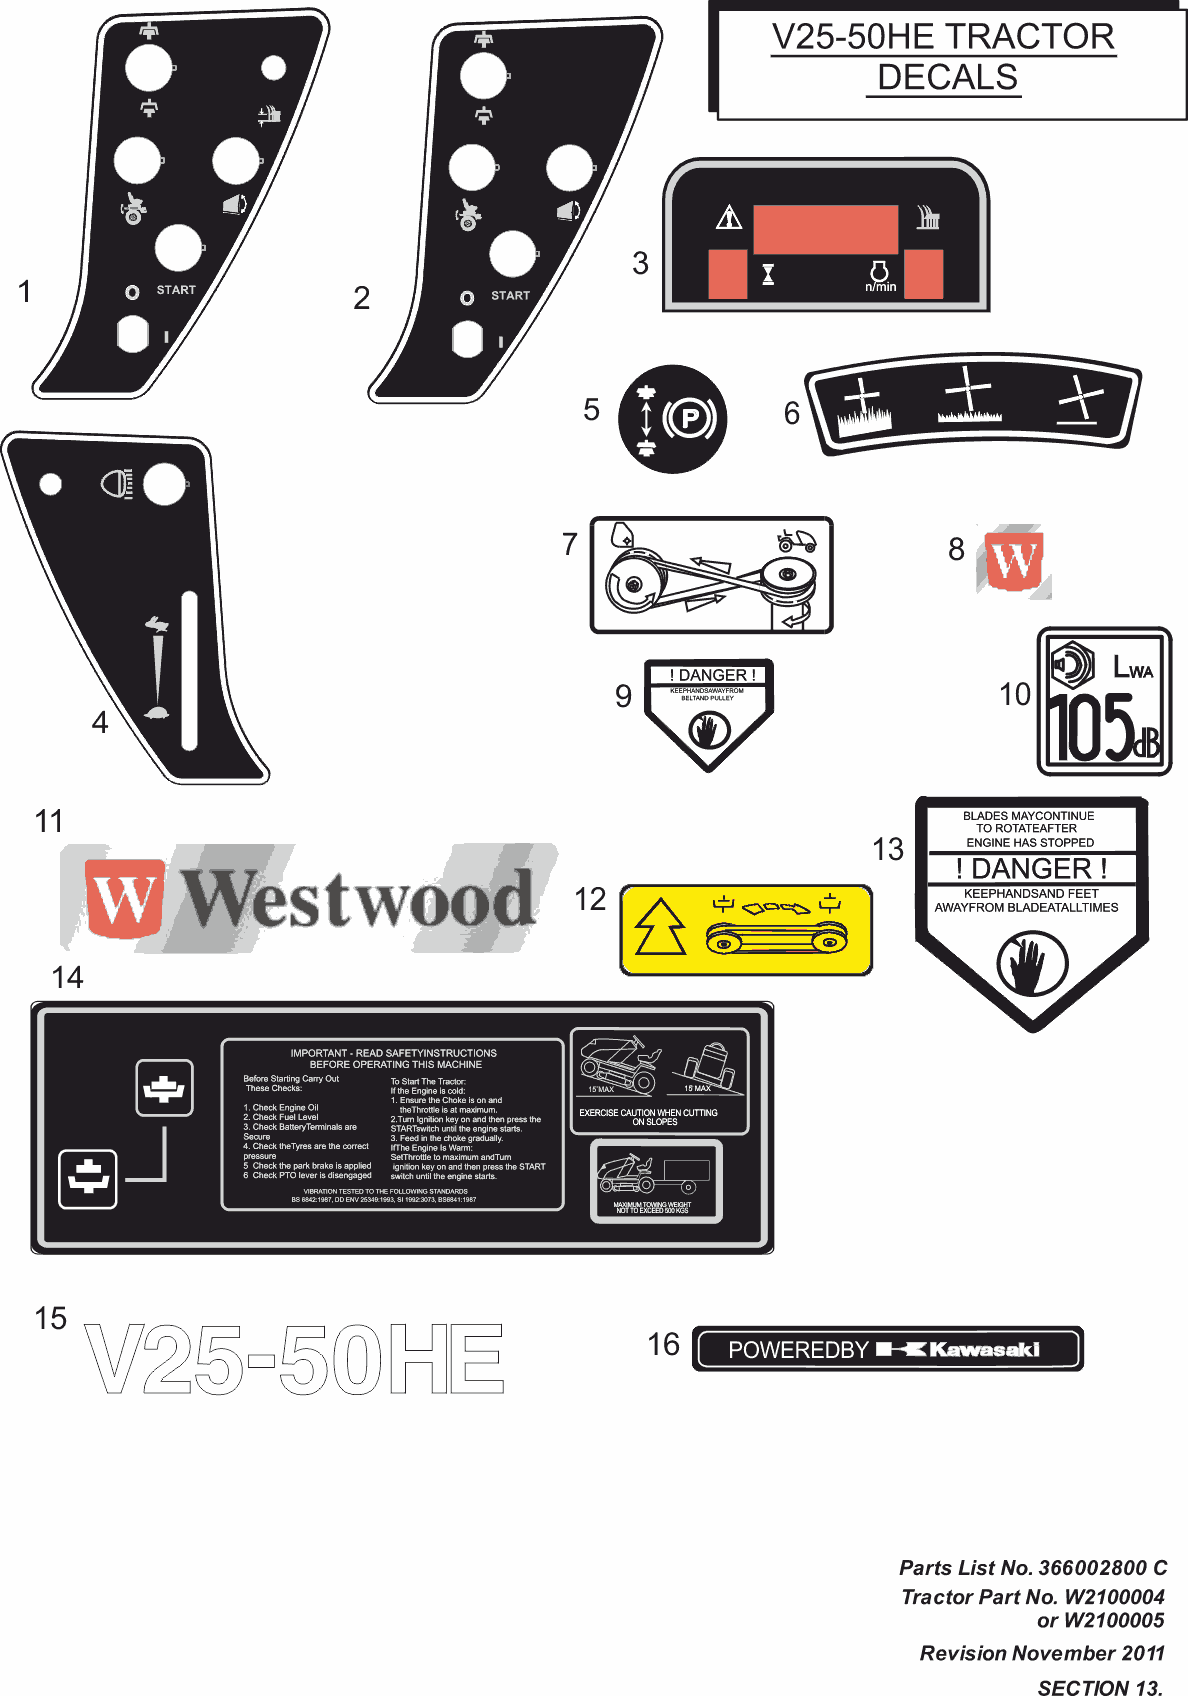 Westwood V2550HE - Decal